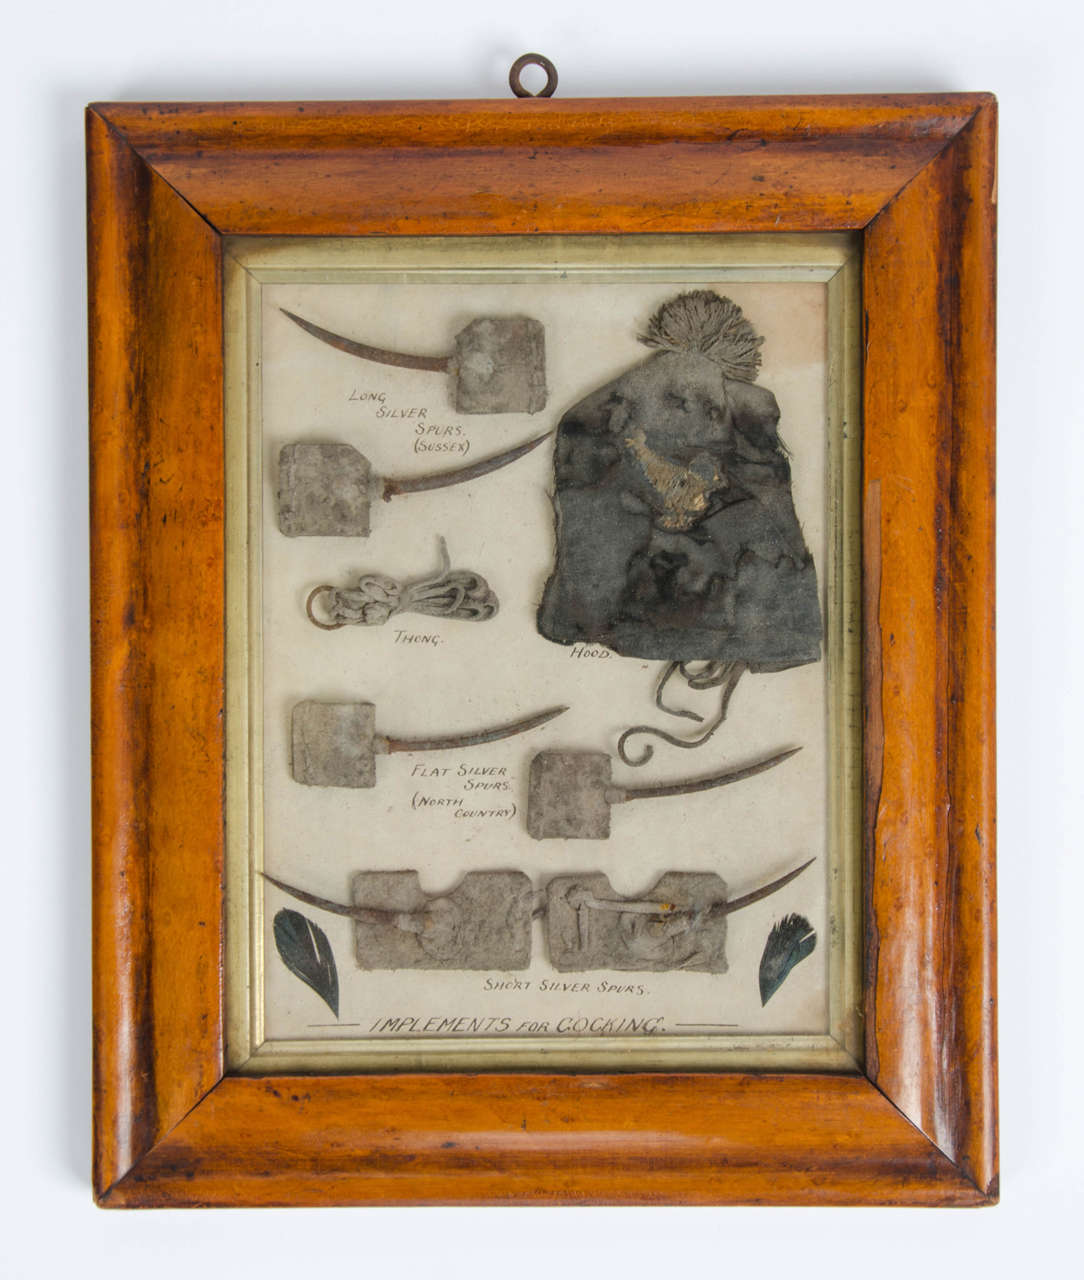 A most unusual hand written named and dated framed Cockfighting rules, with fighting spurs, hood and thong in matching frame. The cotton hood having a silk stitched fighting cock embroidered into it. The rules are named John Ardesois and dated 1754